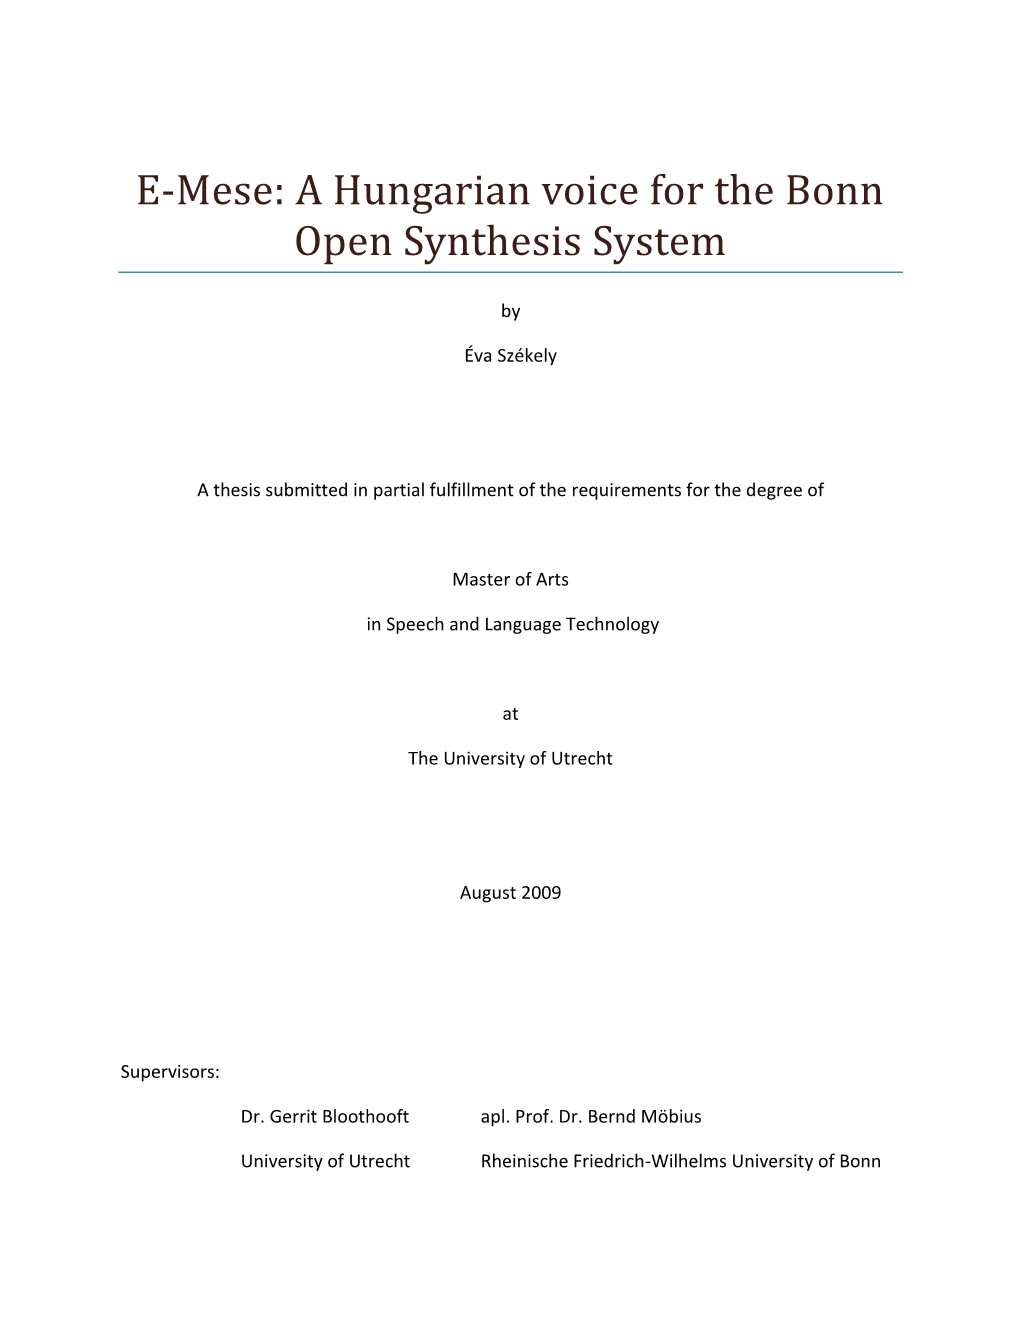 E-Mese: a Hungarian Voice for the Bonn Open Synthesis System